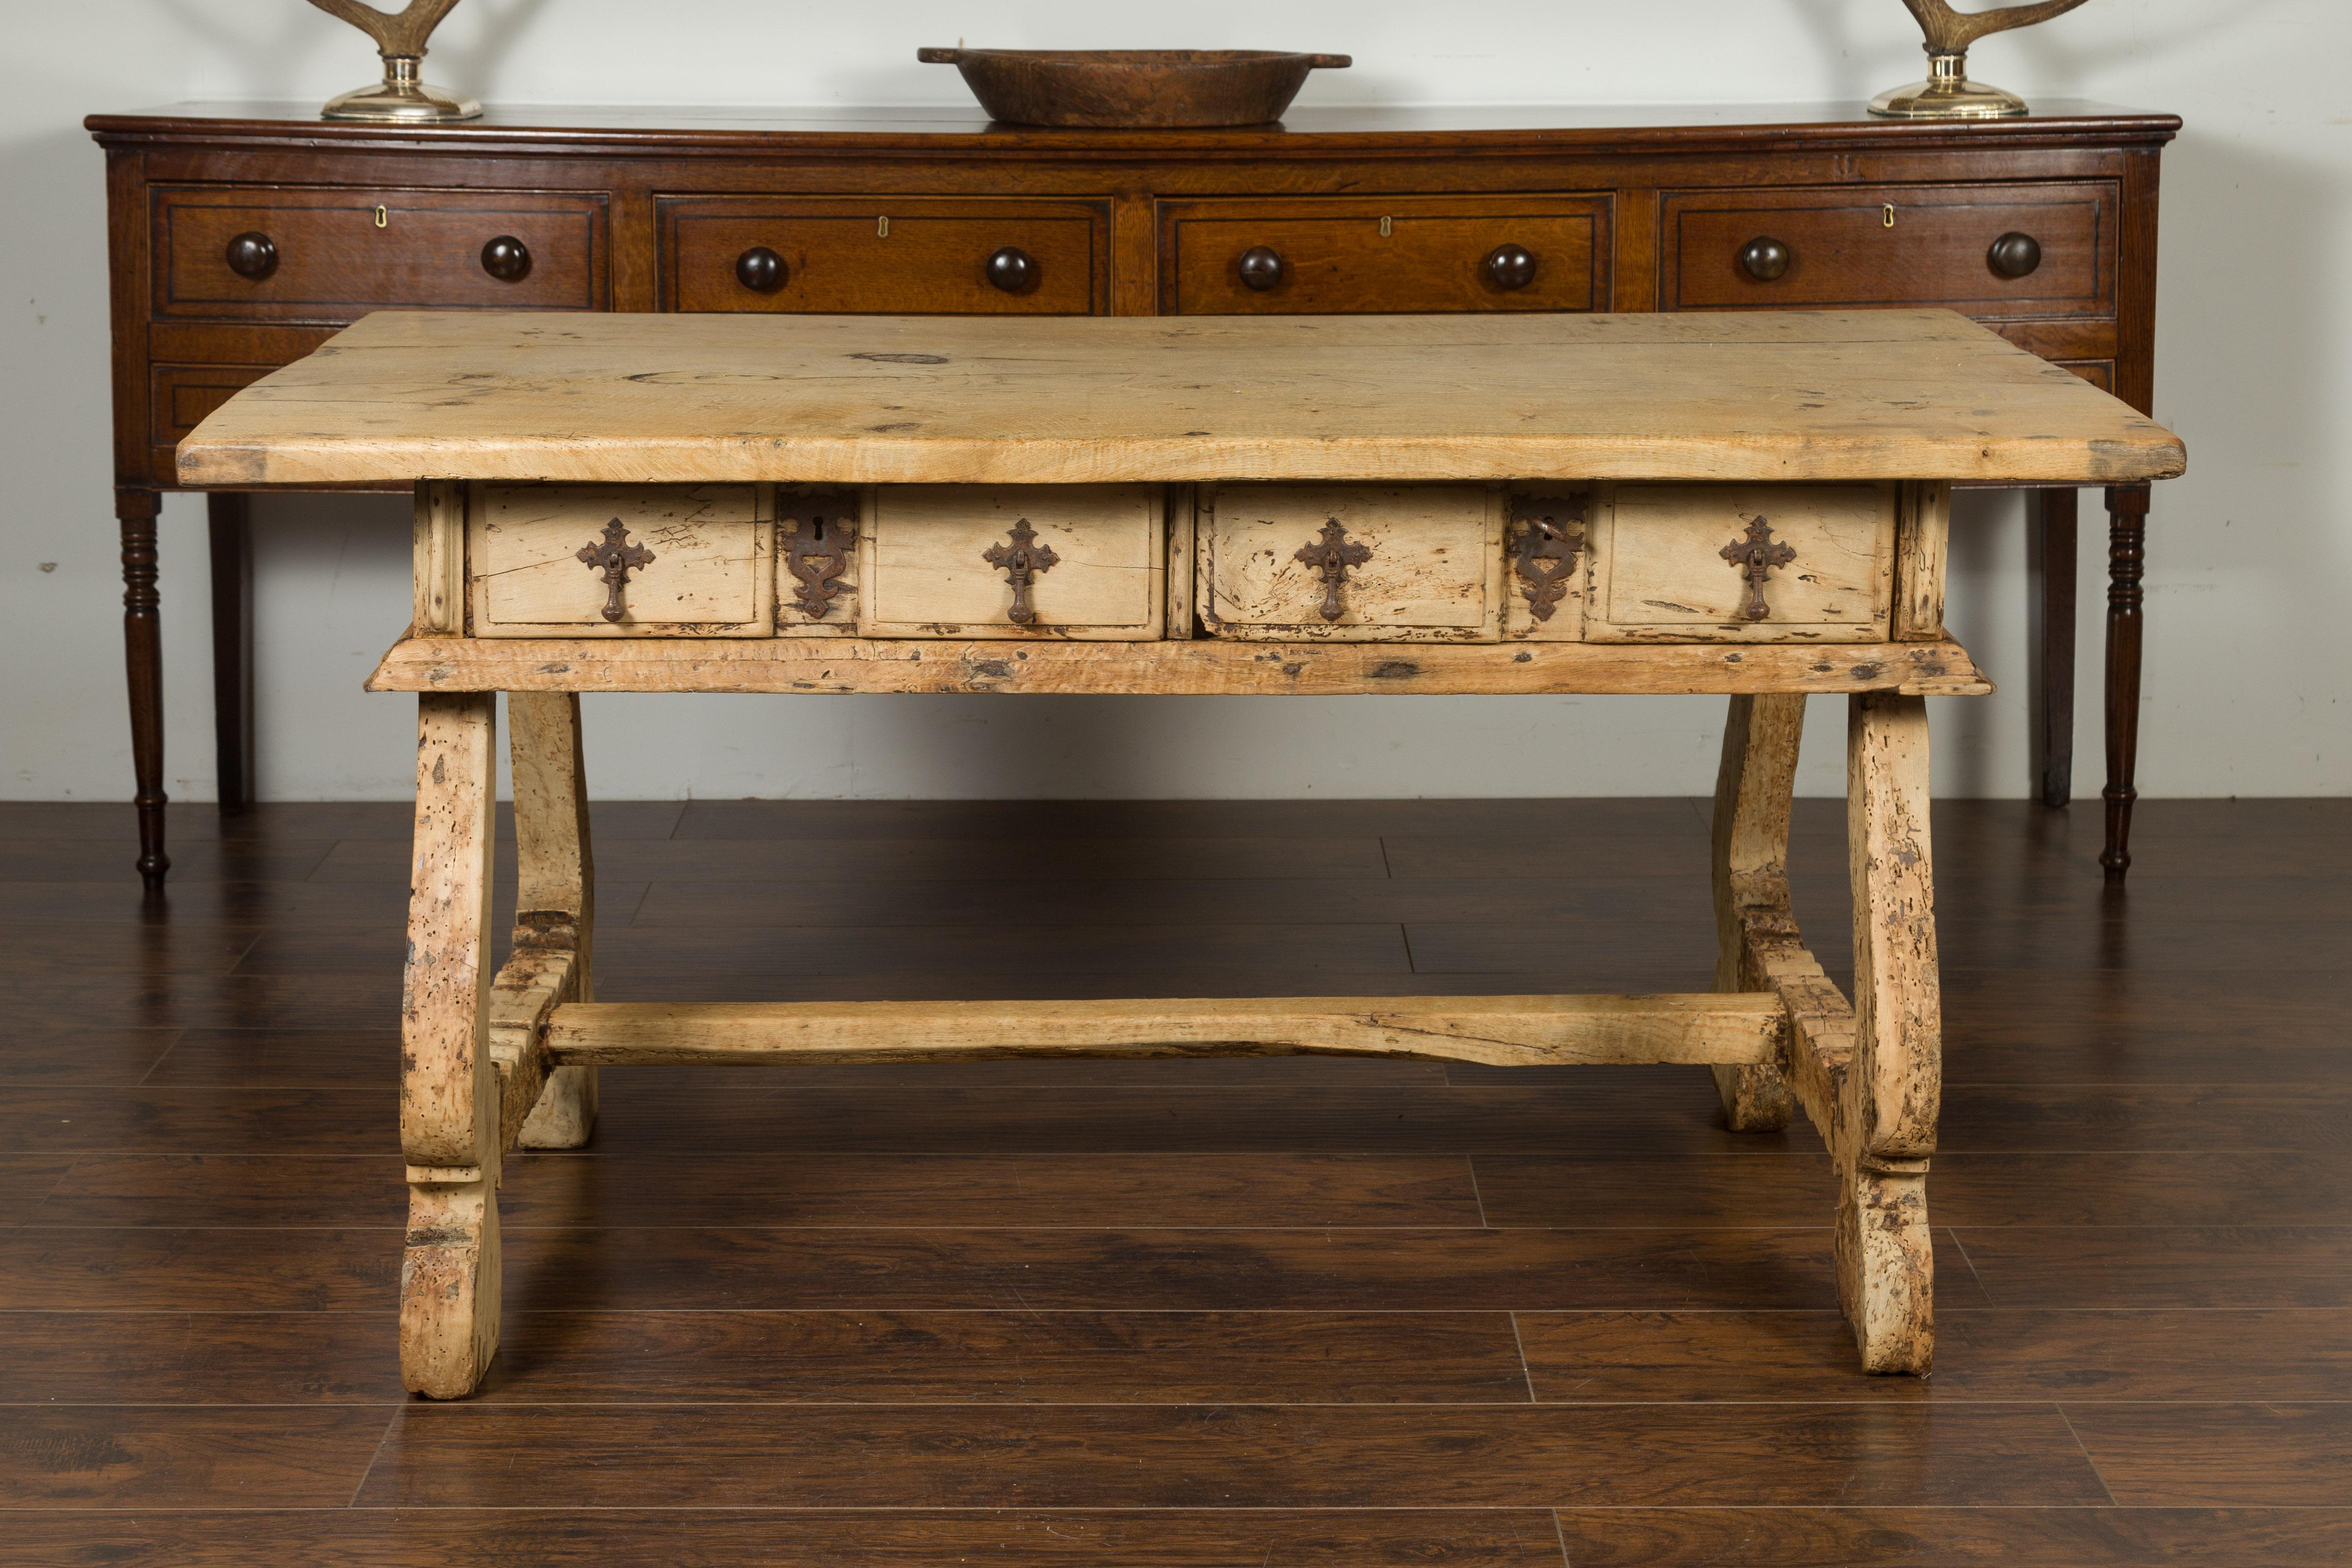 A Spanish Baroque style freshly bleached walnut trestle base farm table from the early 19th century, with two drawers and distressed patina. Created in Spain during the first quarter of the 19th century, this farm table features a rectangular